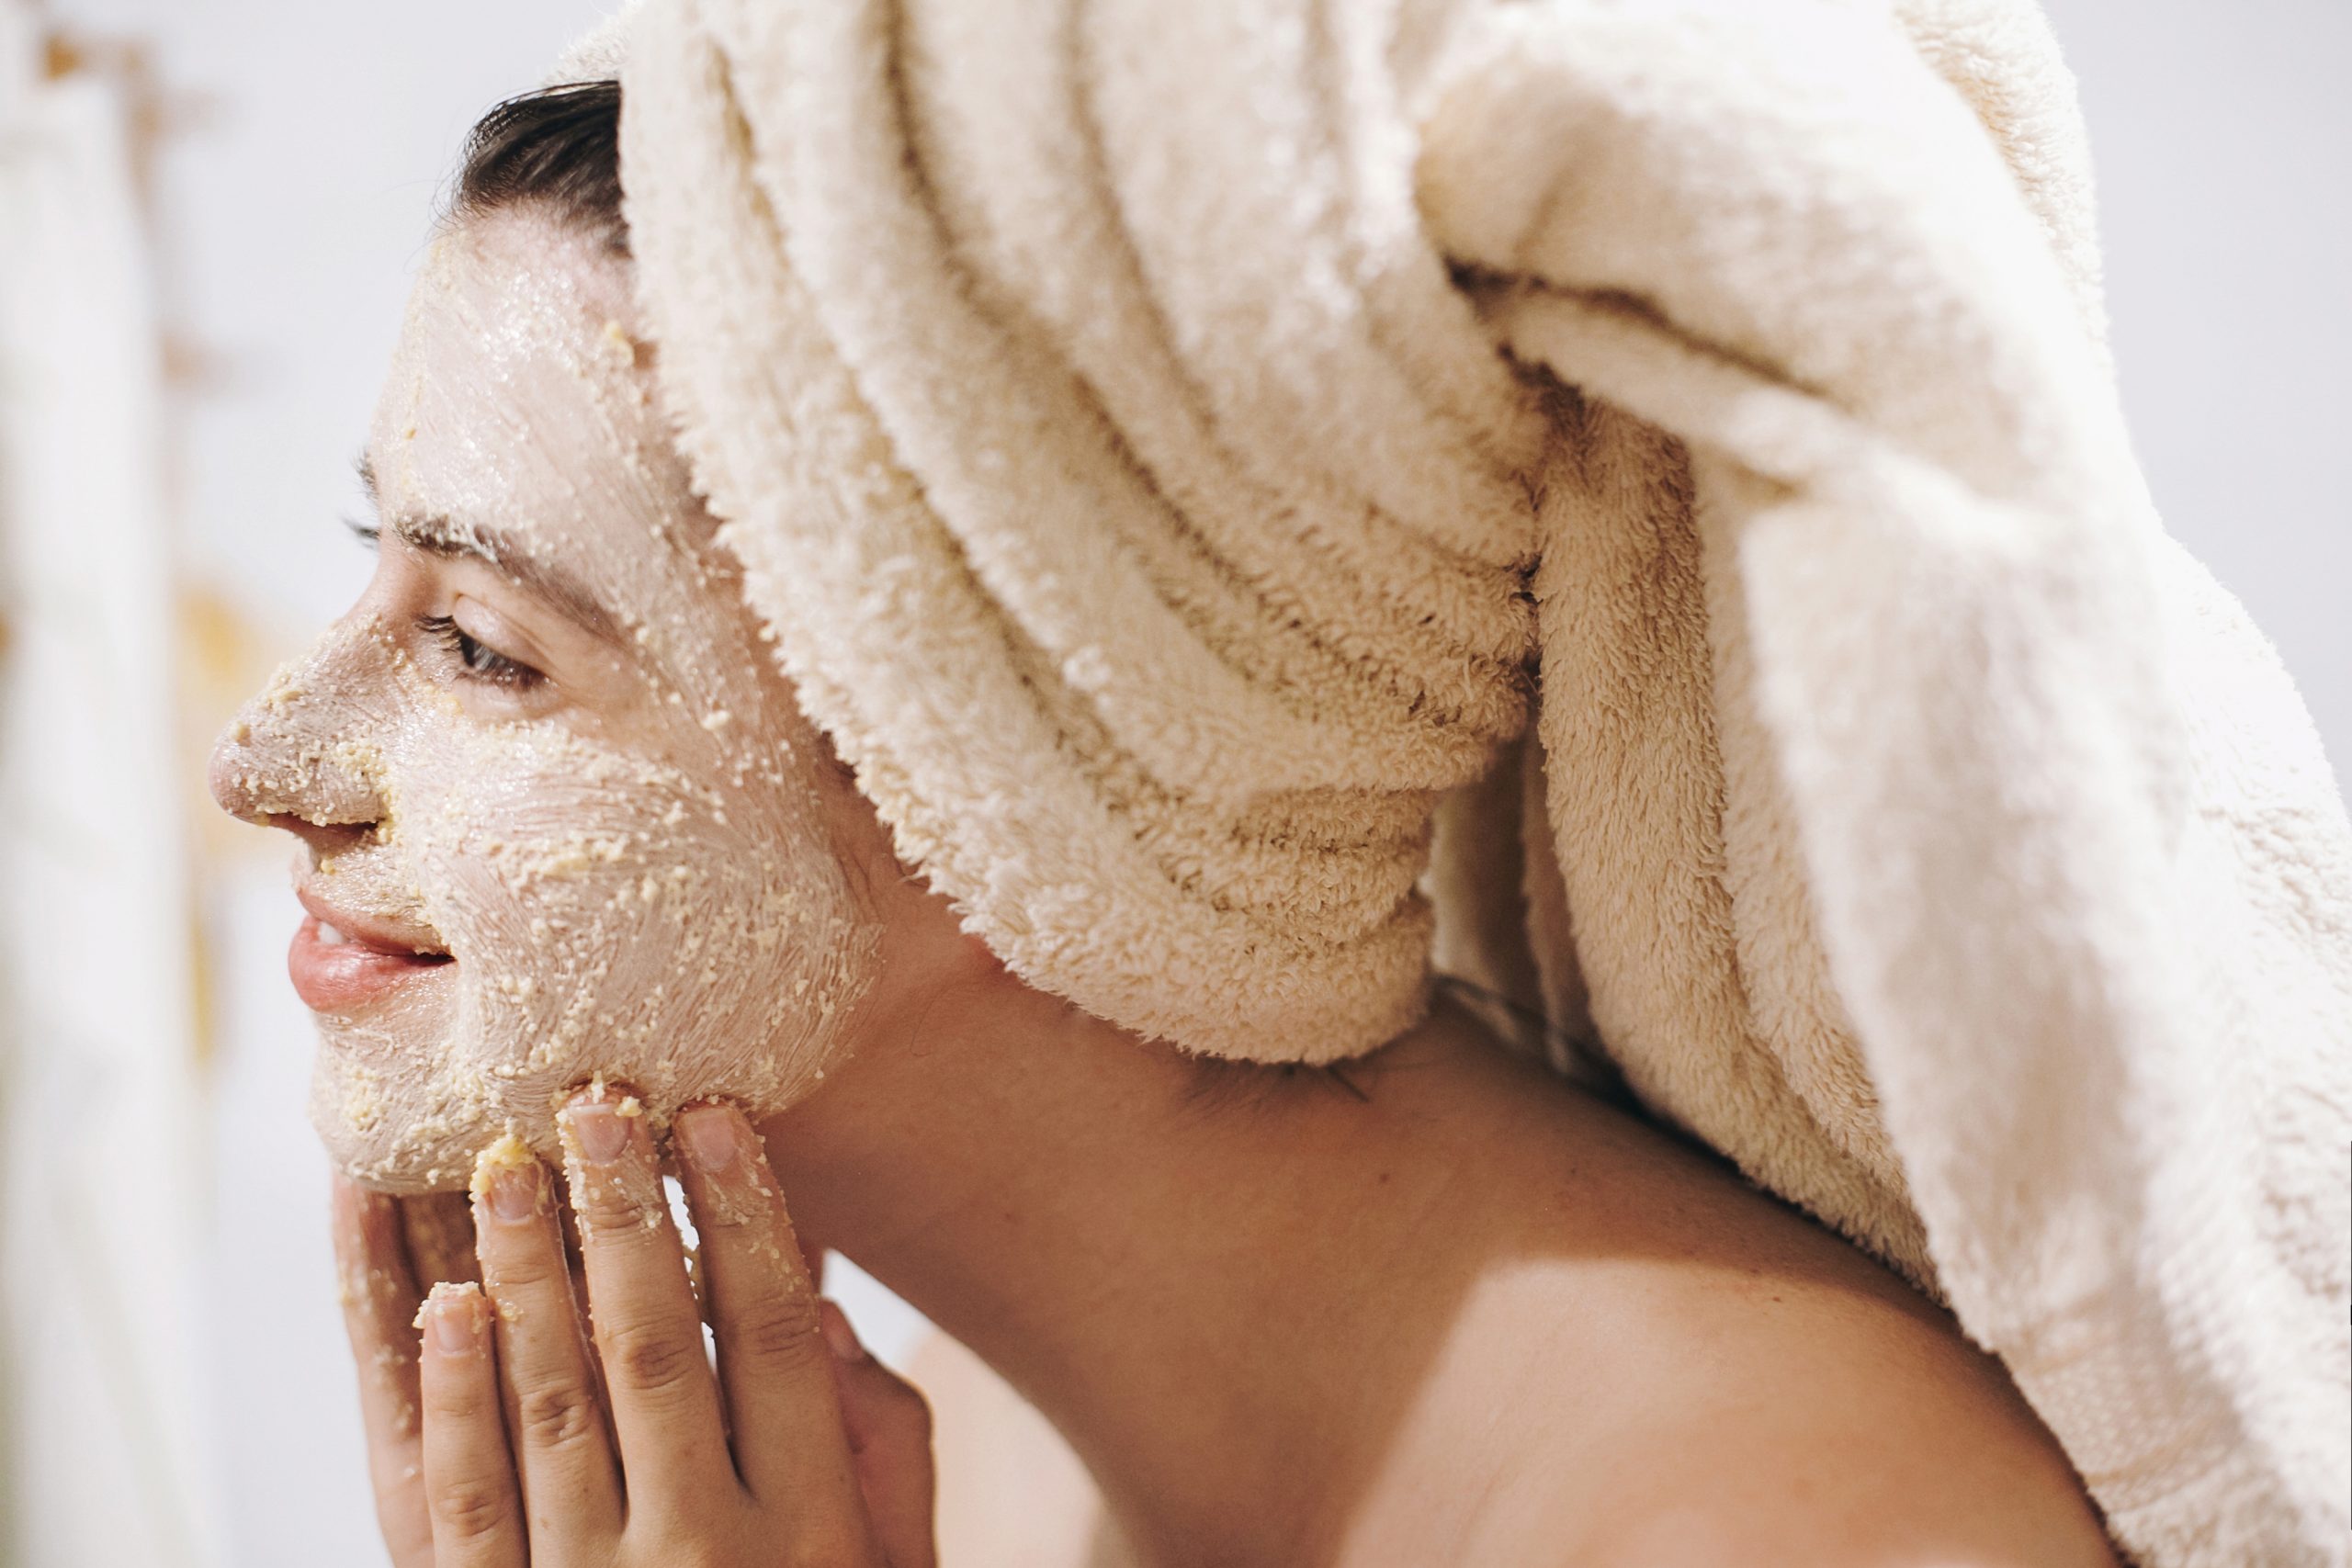 A brightening facial scrub? It doesn’t get any easier than this